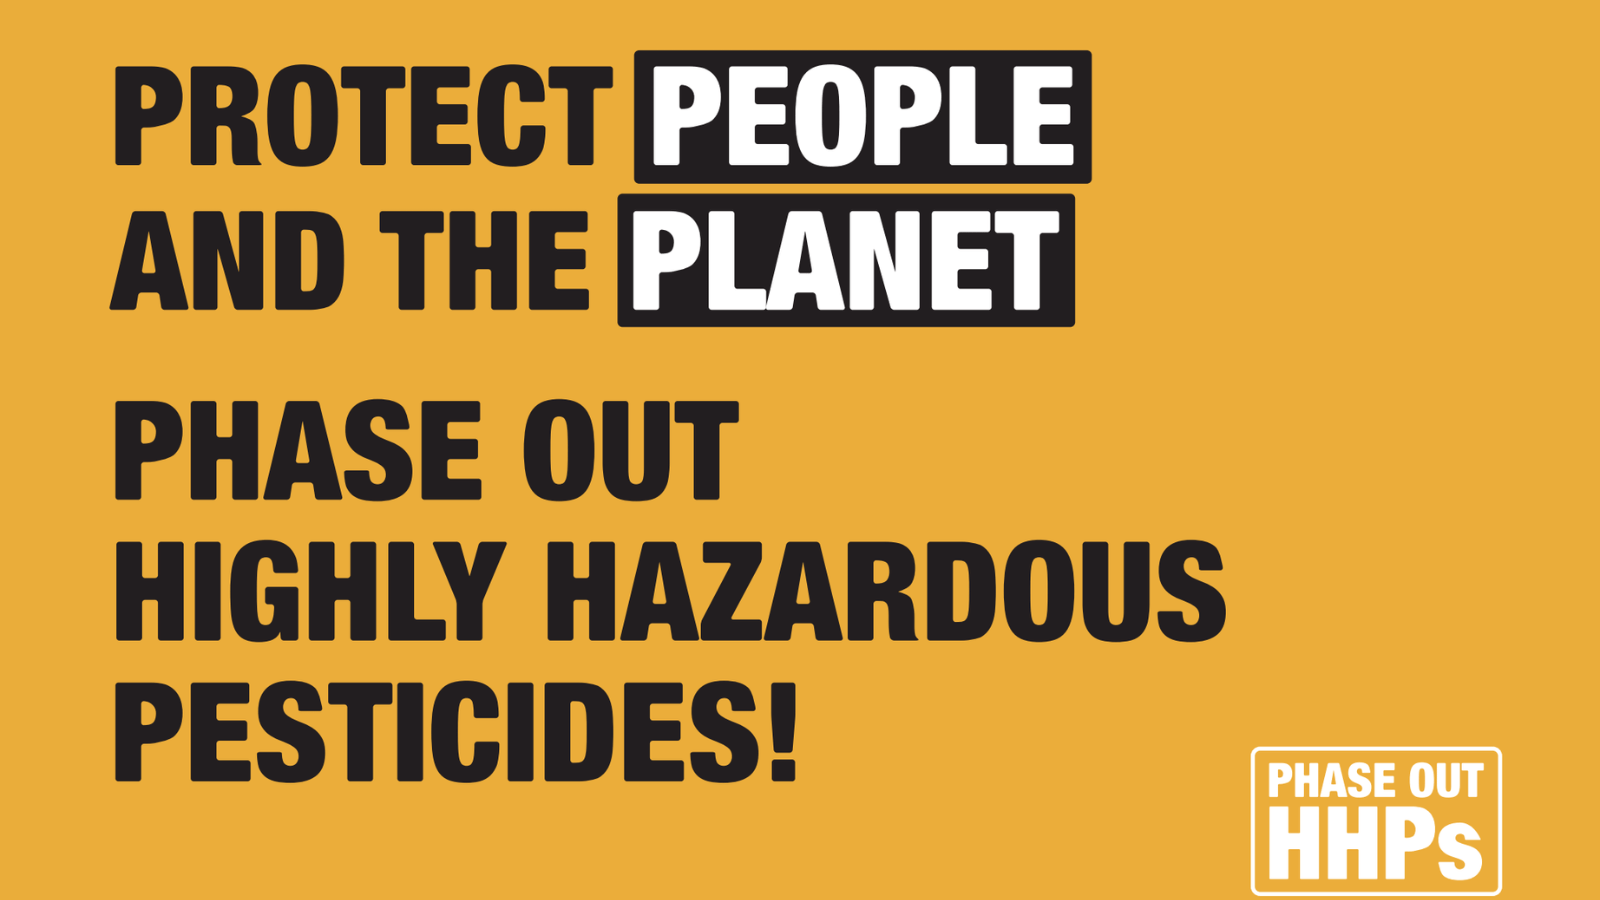 373 civil society groups urge leaders to take ambitious action to phase out world’s most dangerous pesticides